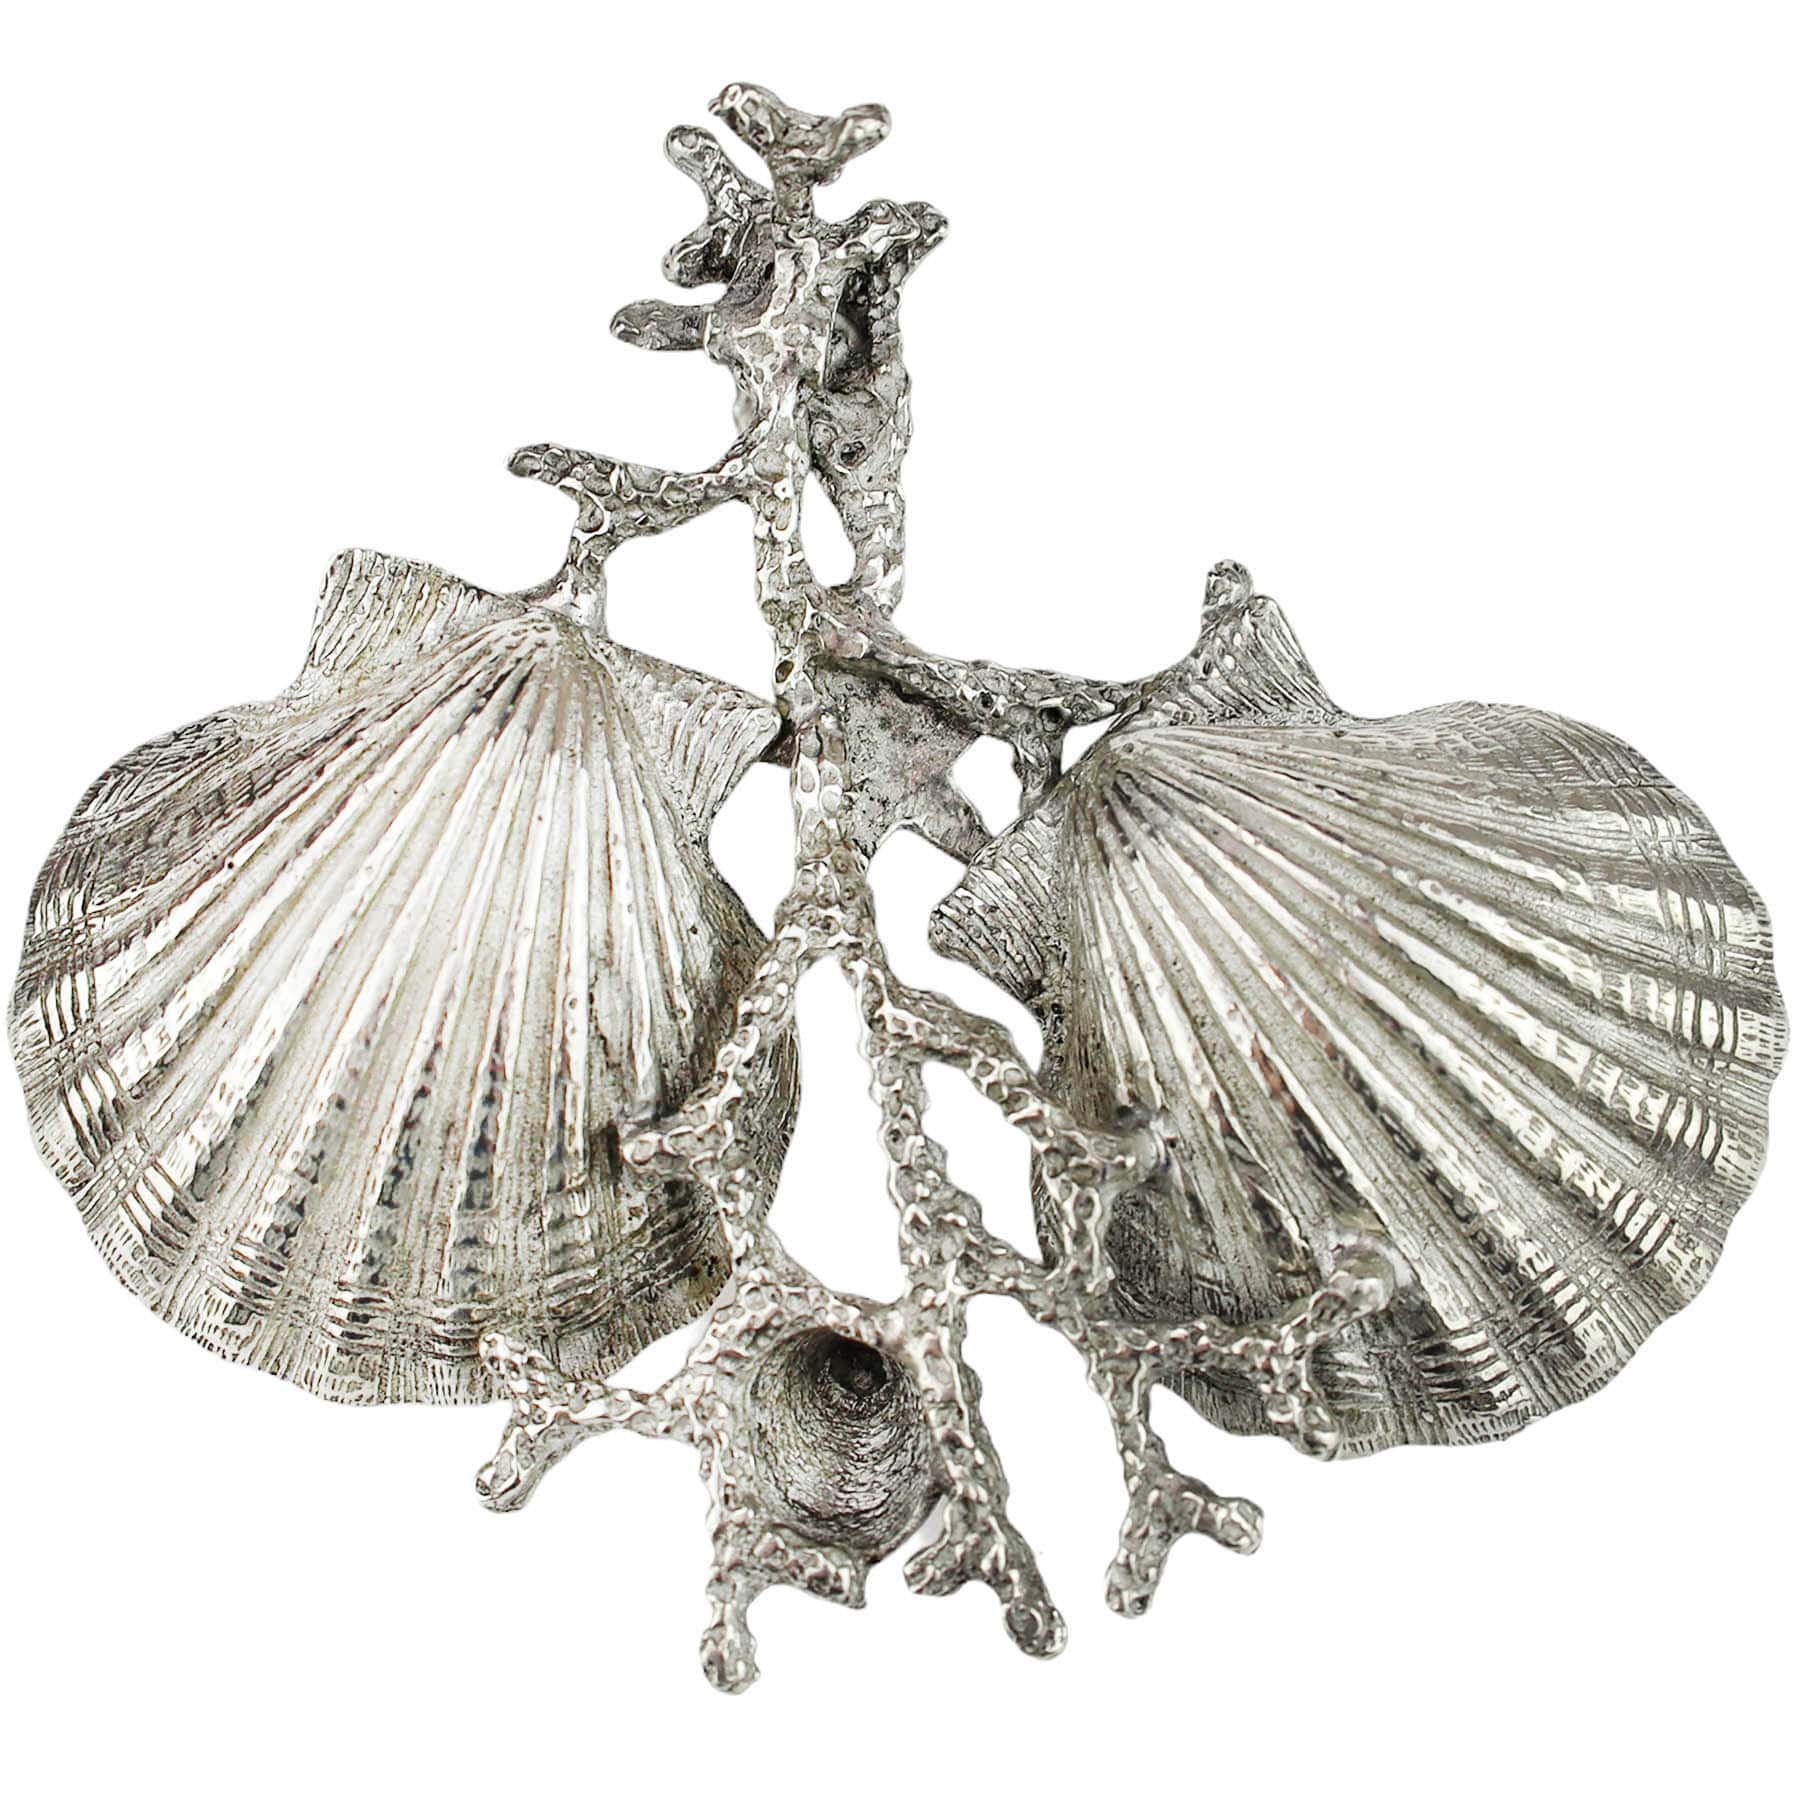 Reverse Aerial view Close up of Pewter Shell & Coral Condiment Set consisting of two pewter bowls held together by a sea coral design pewter structure.You can see the underside of the bowls shaped like scallop shells